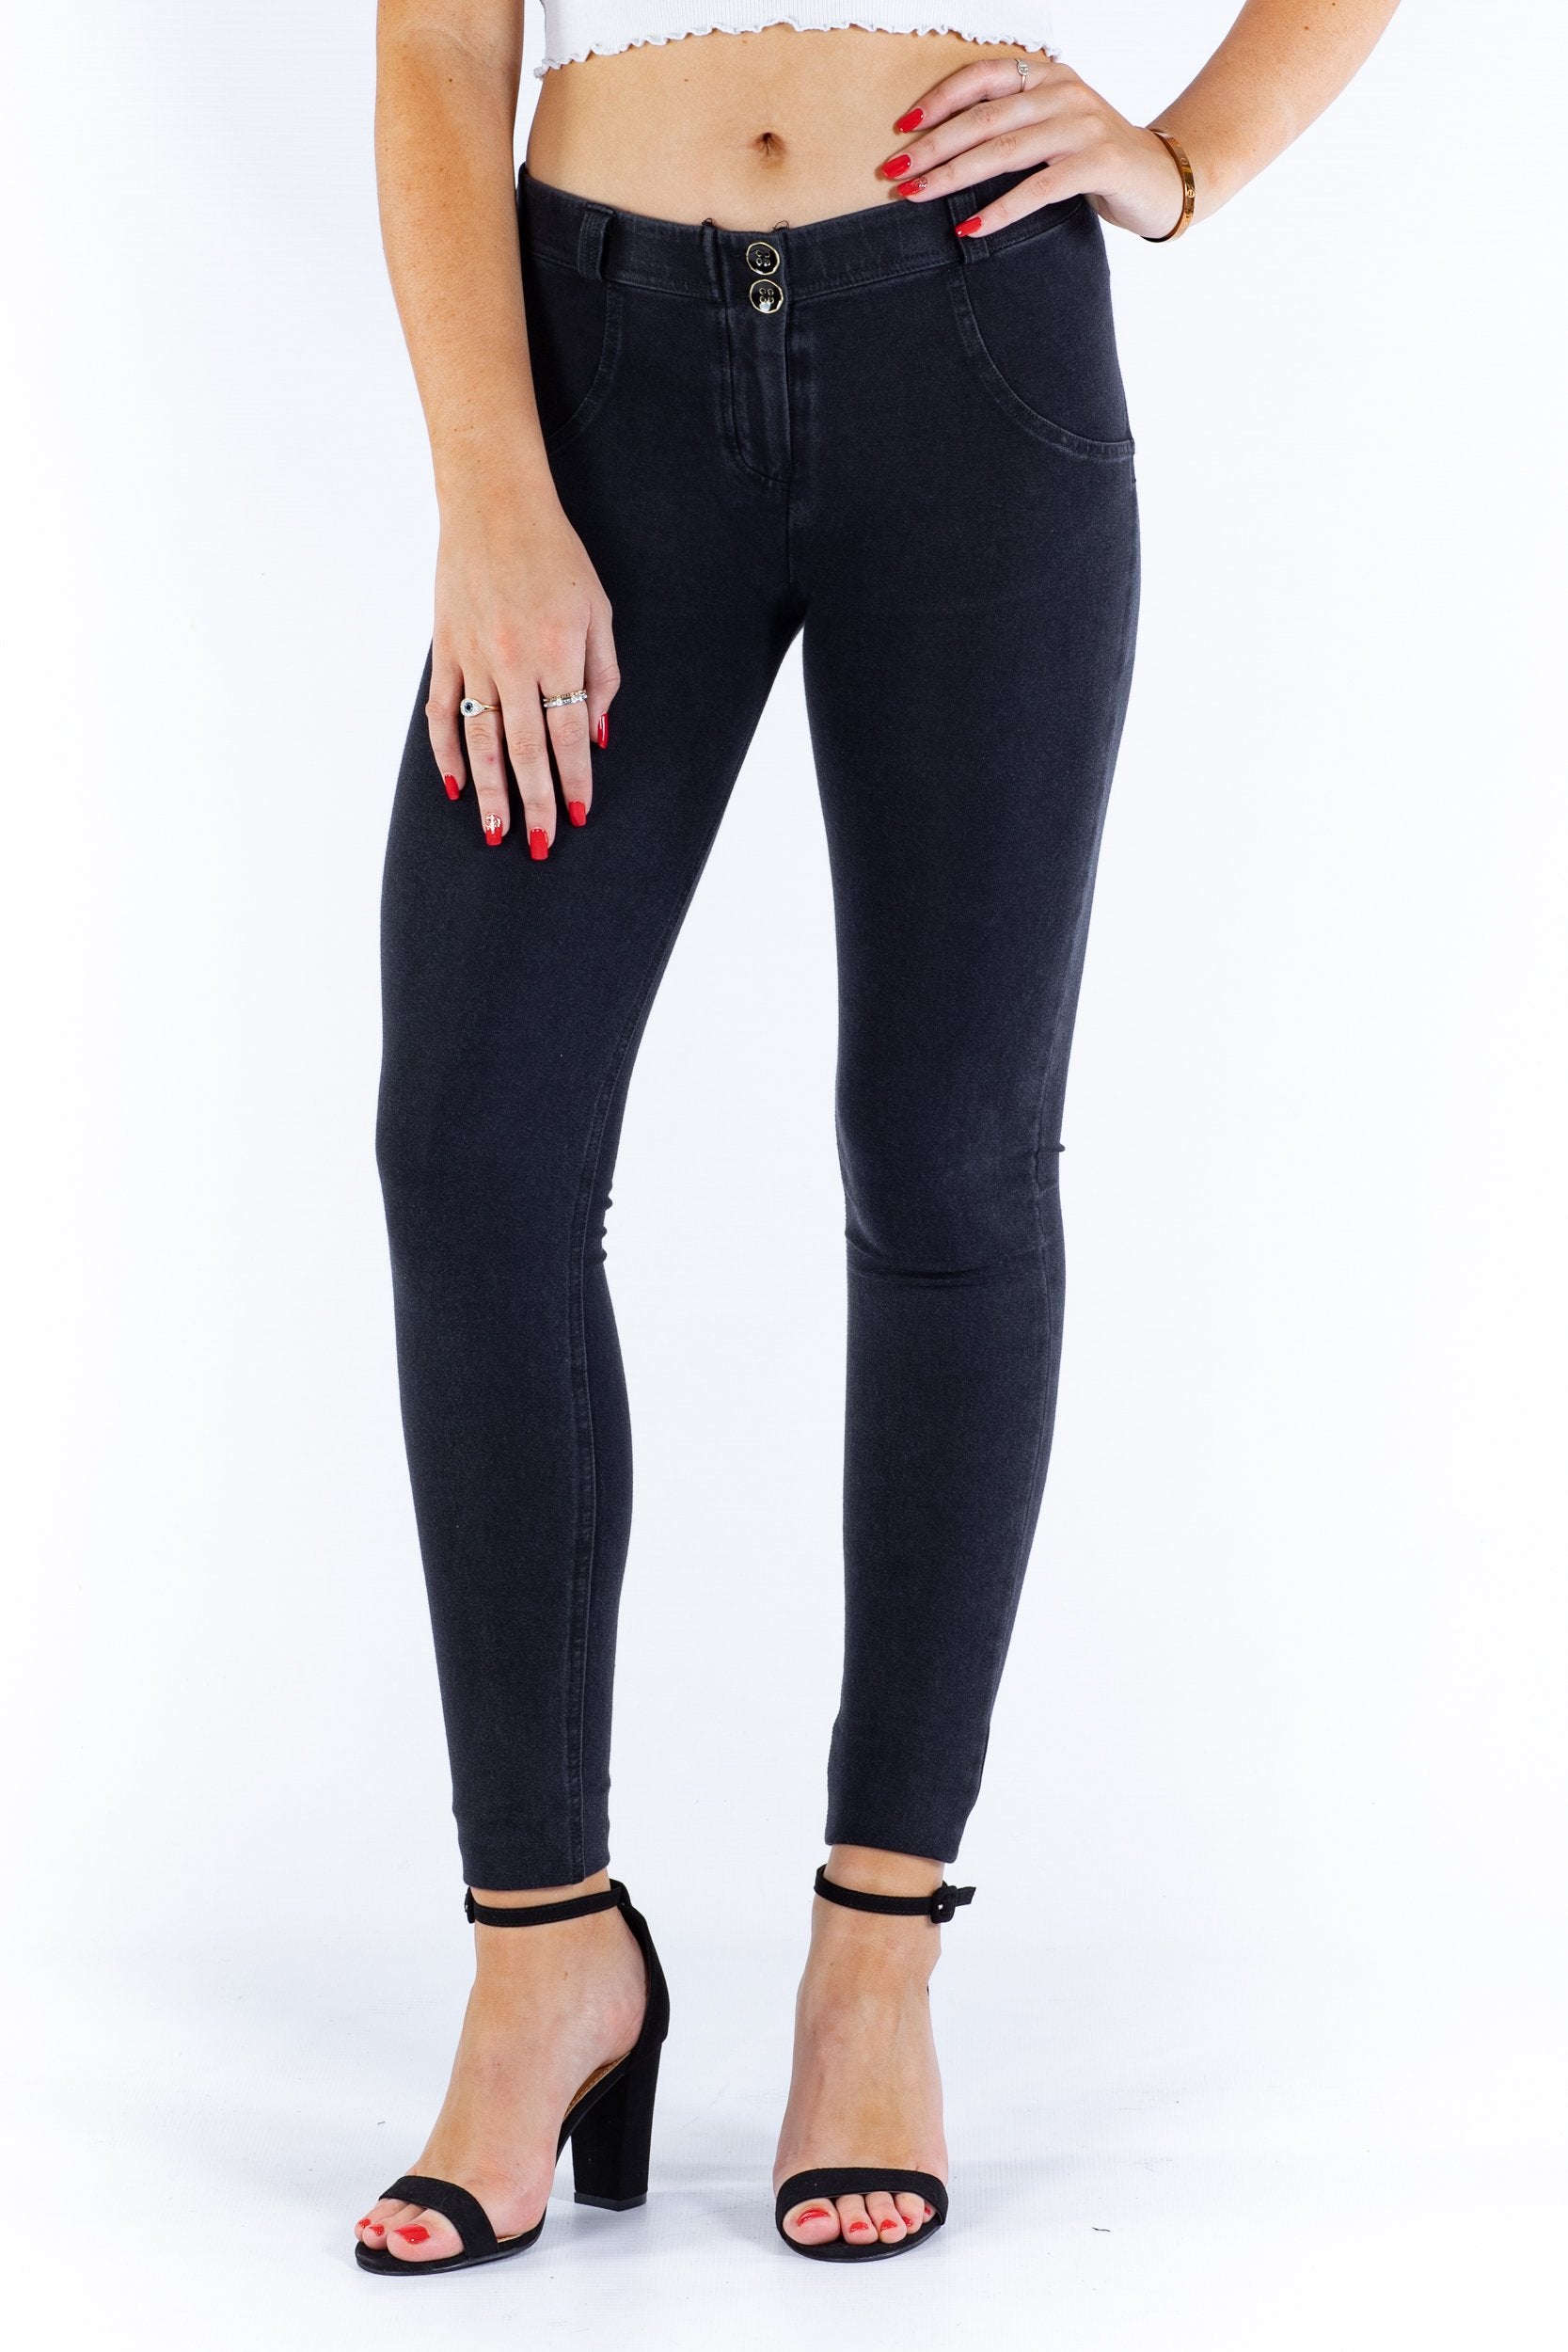 Image of Mid waist Shapewear Butt lifting Shaping Jeans/Jeggings - Black wash